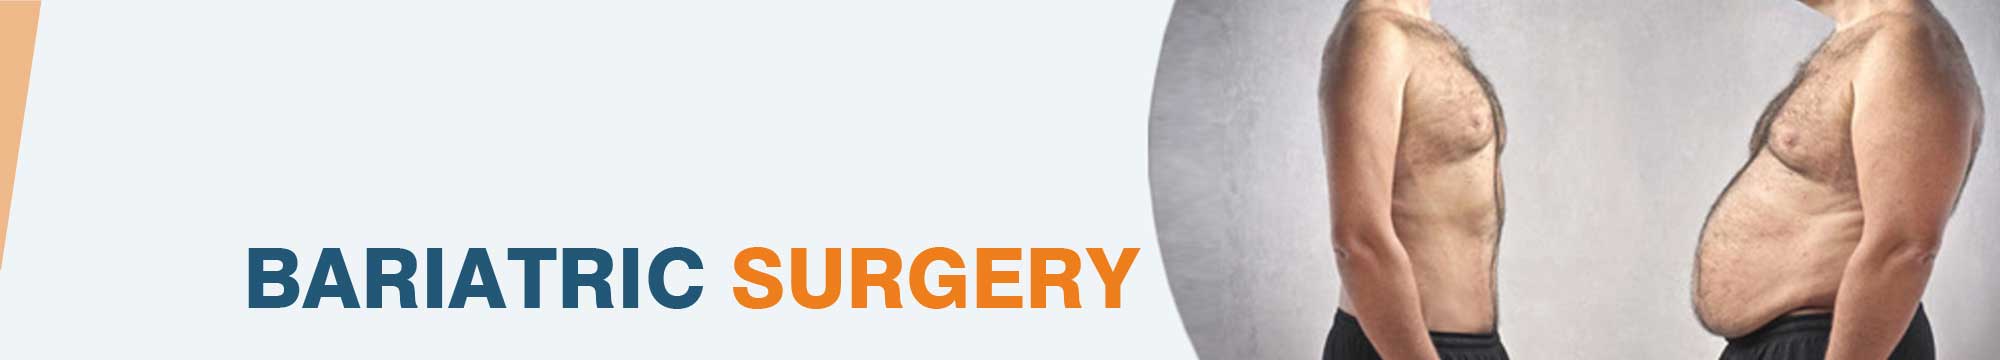 weight loss surgery in india